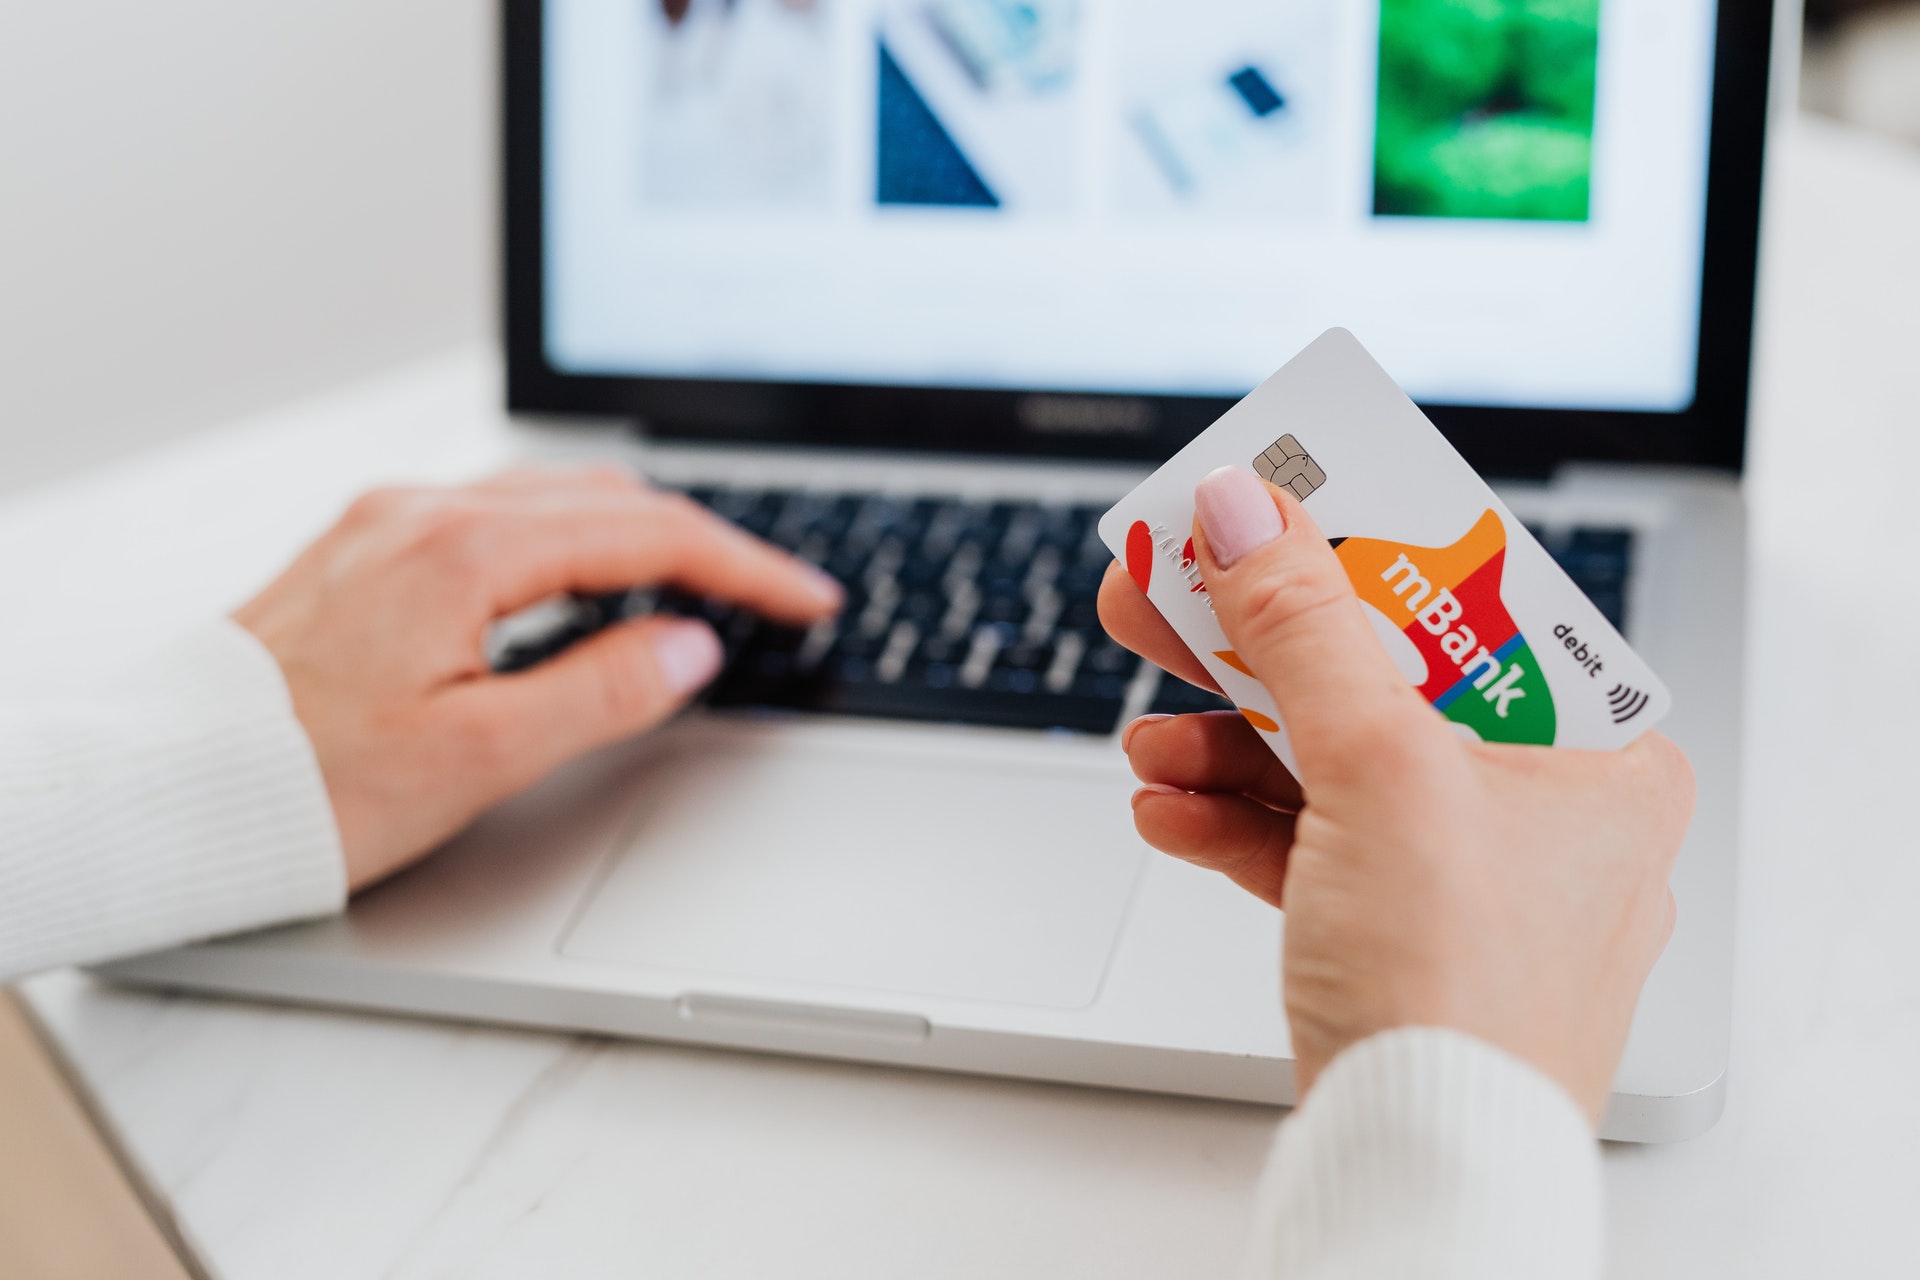 A woman holding a debit card while using her laptop